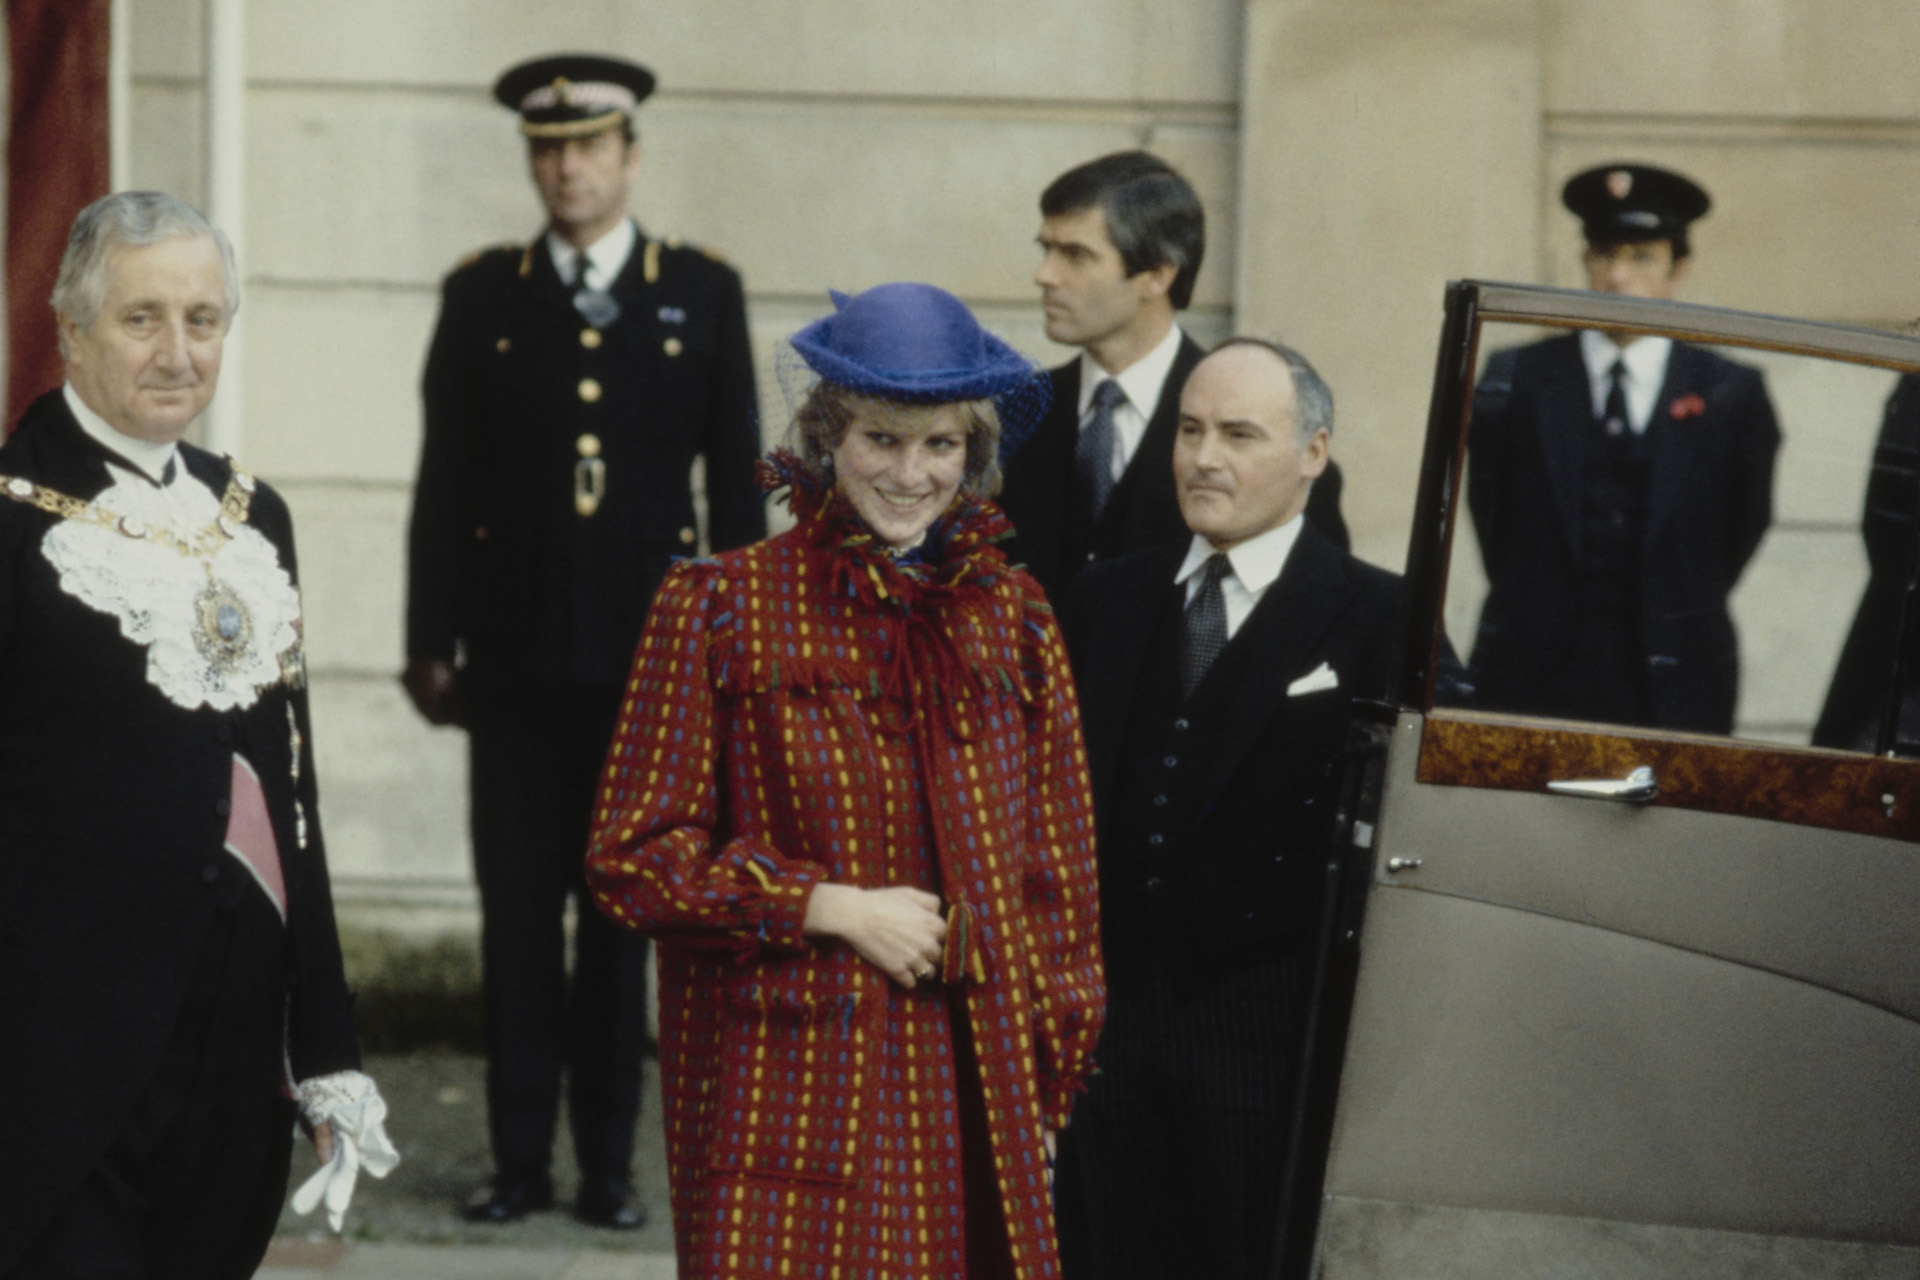 Princess Diana wearing a red coat by Bellville Sassoon and a blue hat by John Boyd, leaves the Guildhall after having lunch with the Lord Mayor in London, England, United Kingdom, November 1981.